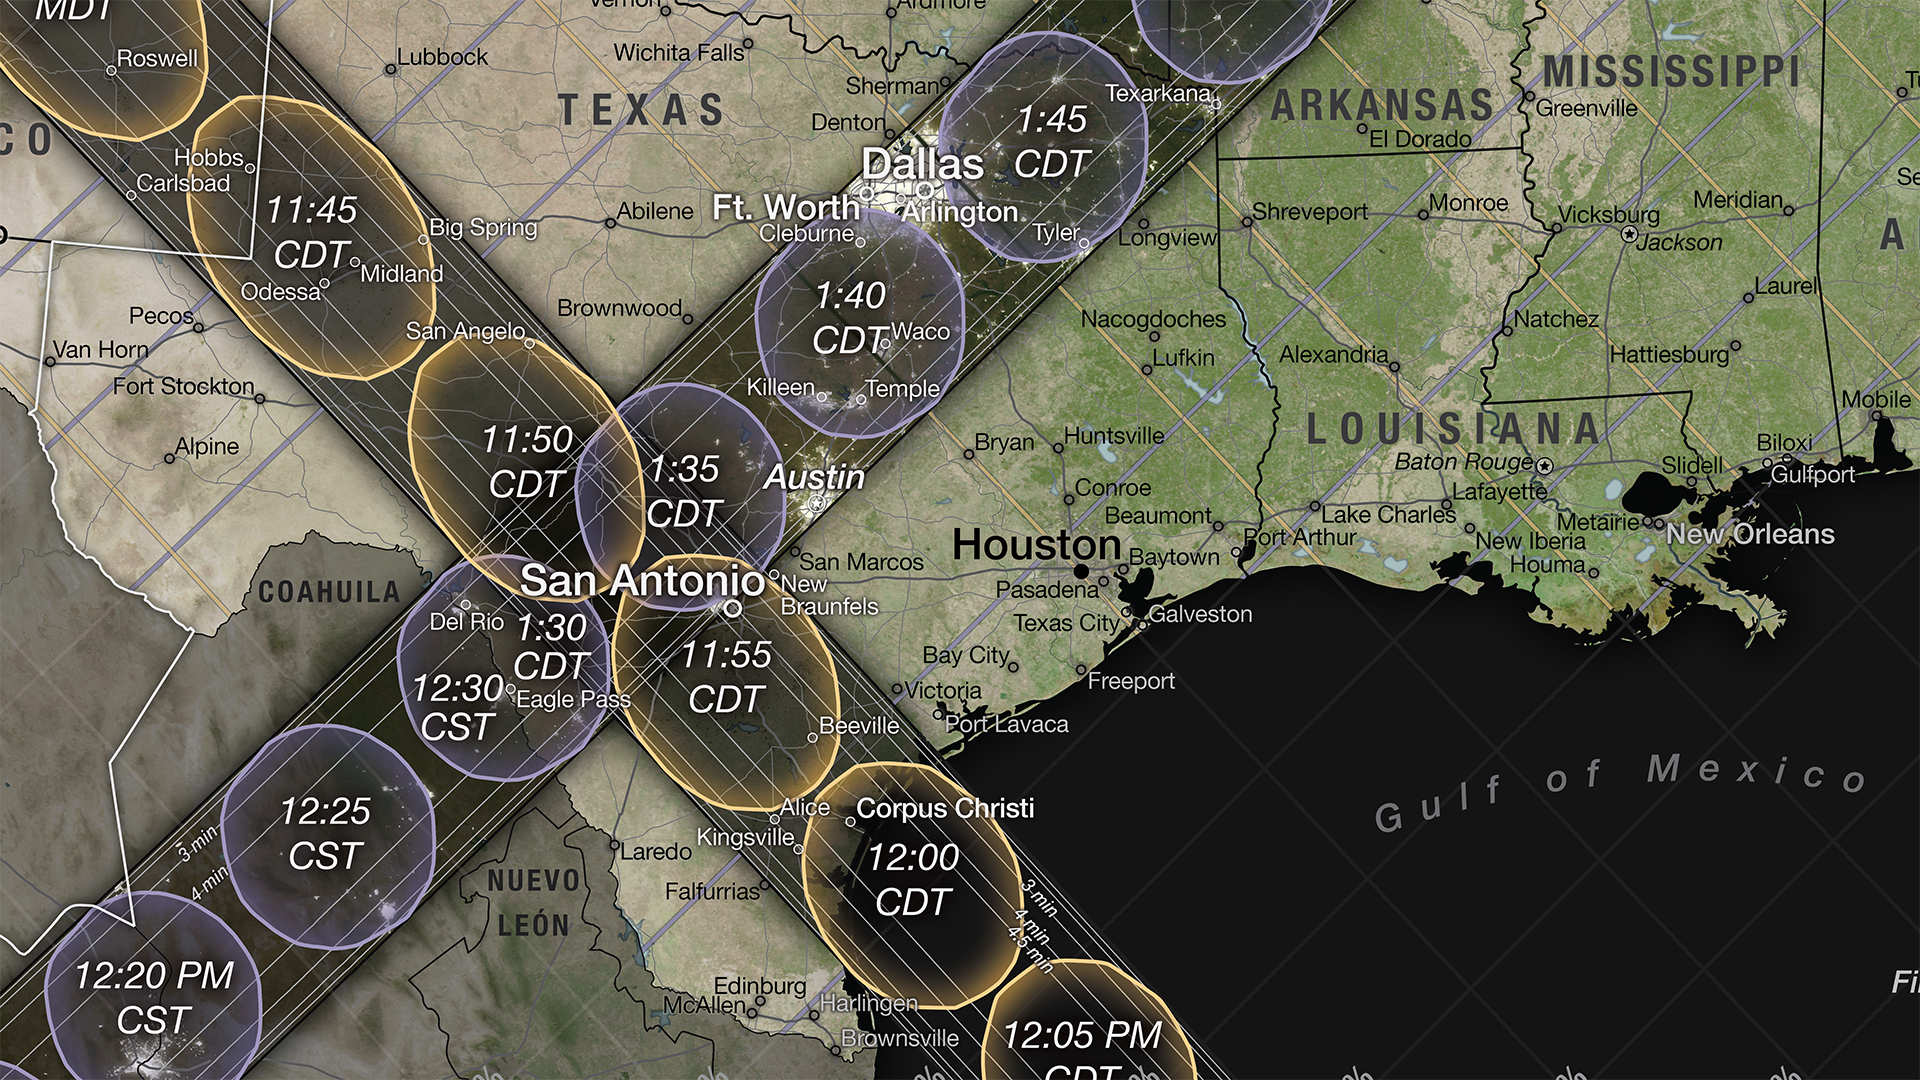 Watch a close-up tour of the new 2023 and 2024 solar eclipse map. Map Credits: Michala Garrison and the Scientific Visualization Studio (SVS), in collaboration with the NASA Heliophysics Activation Team (NASA HEAT), part of NASA’s Science Activation portfolio; eclipse calculations by Ernie Wright, NASA Goddard Space Flight Center